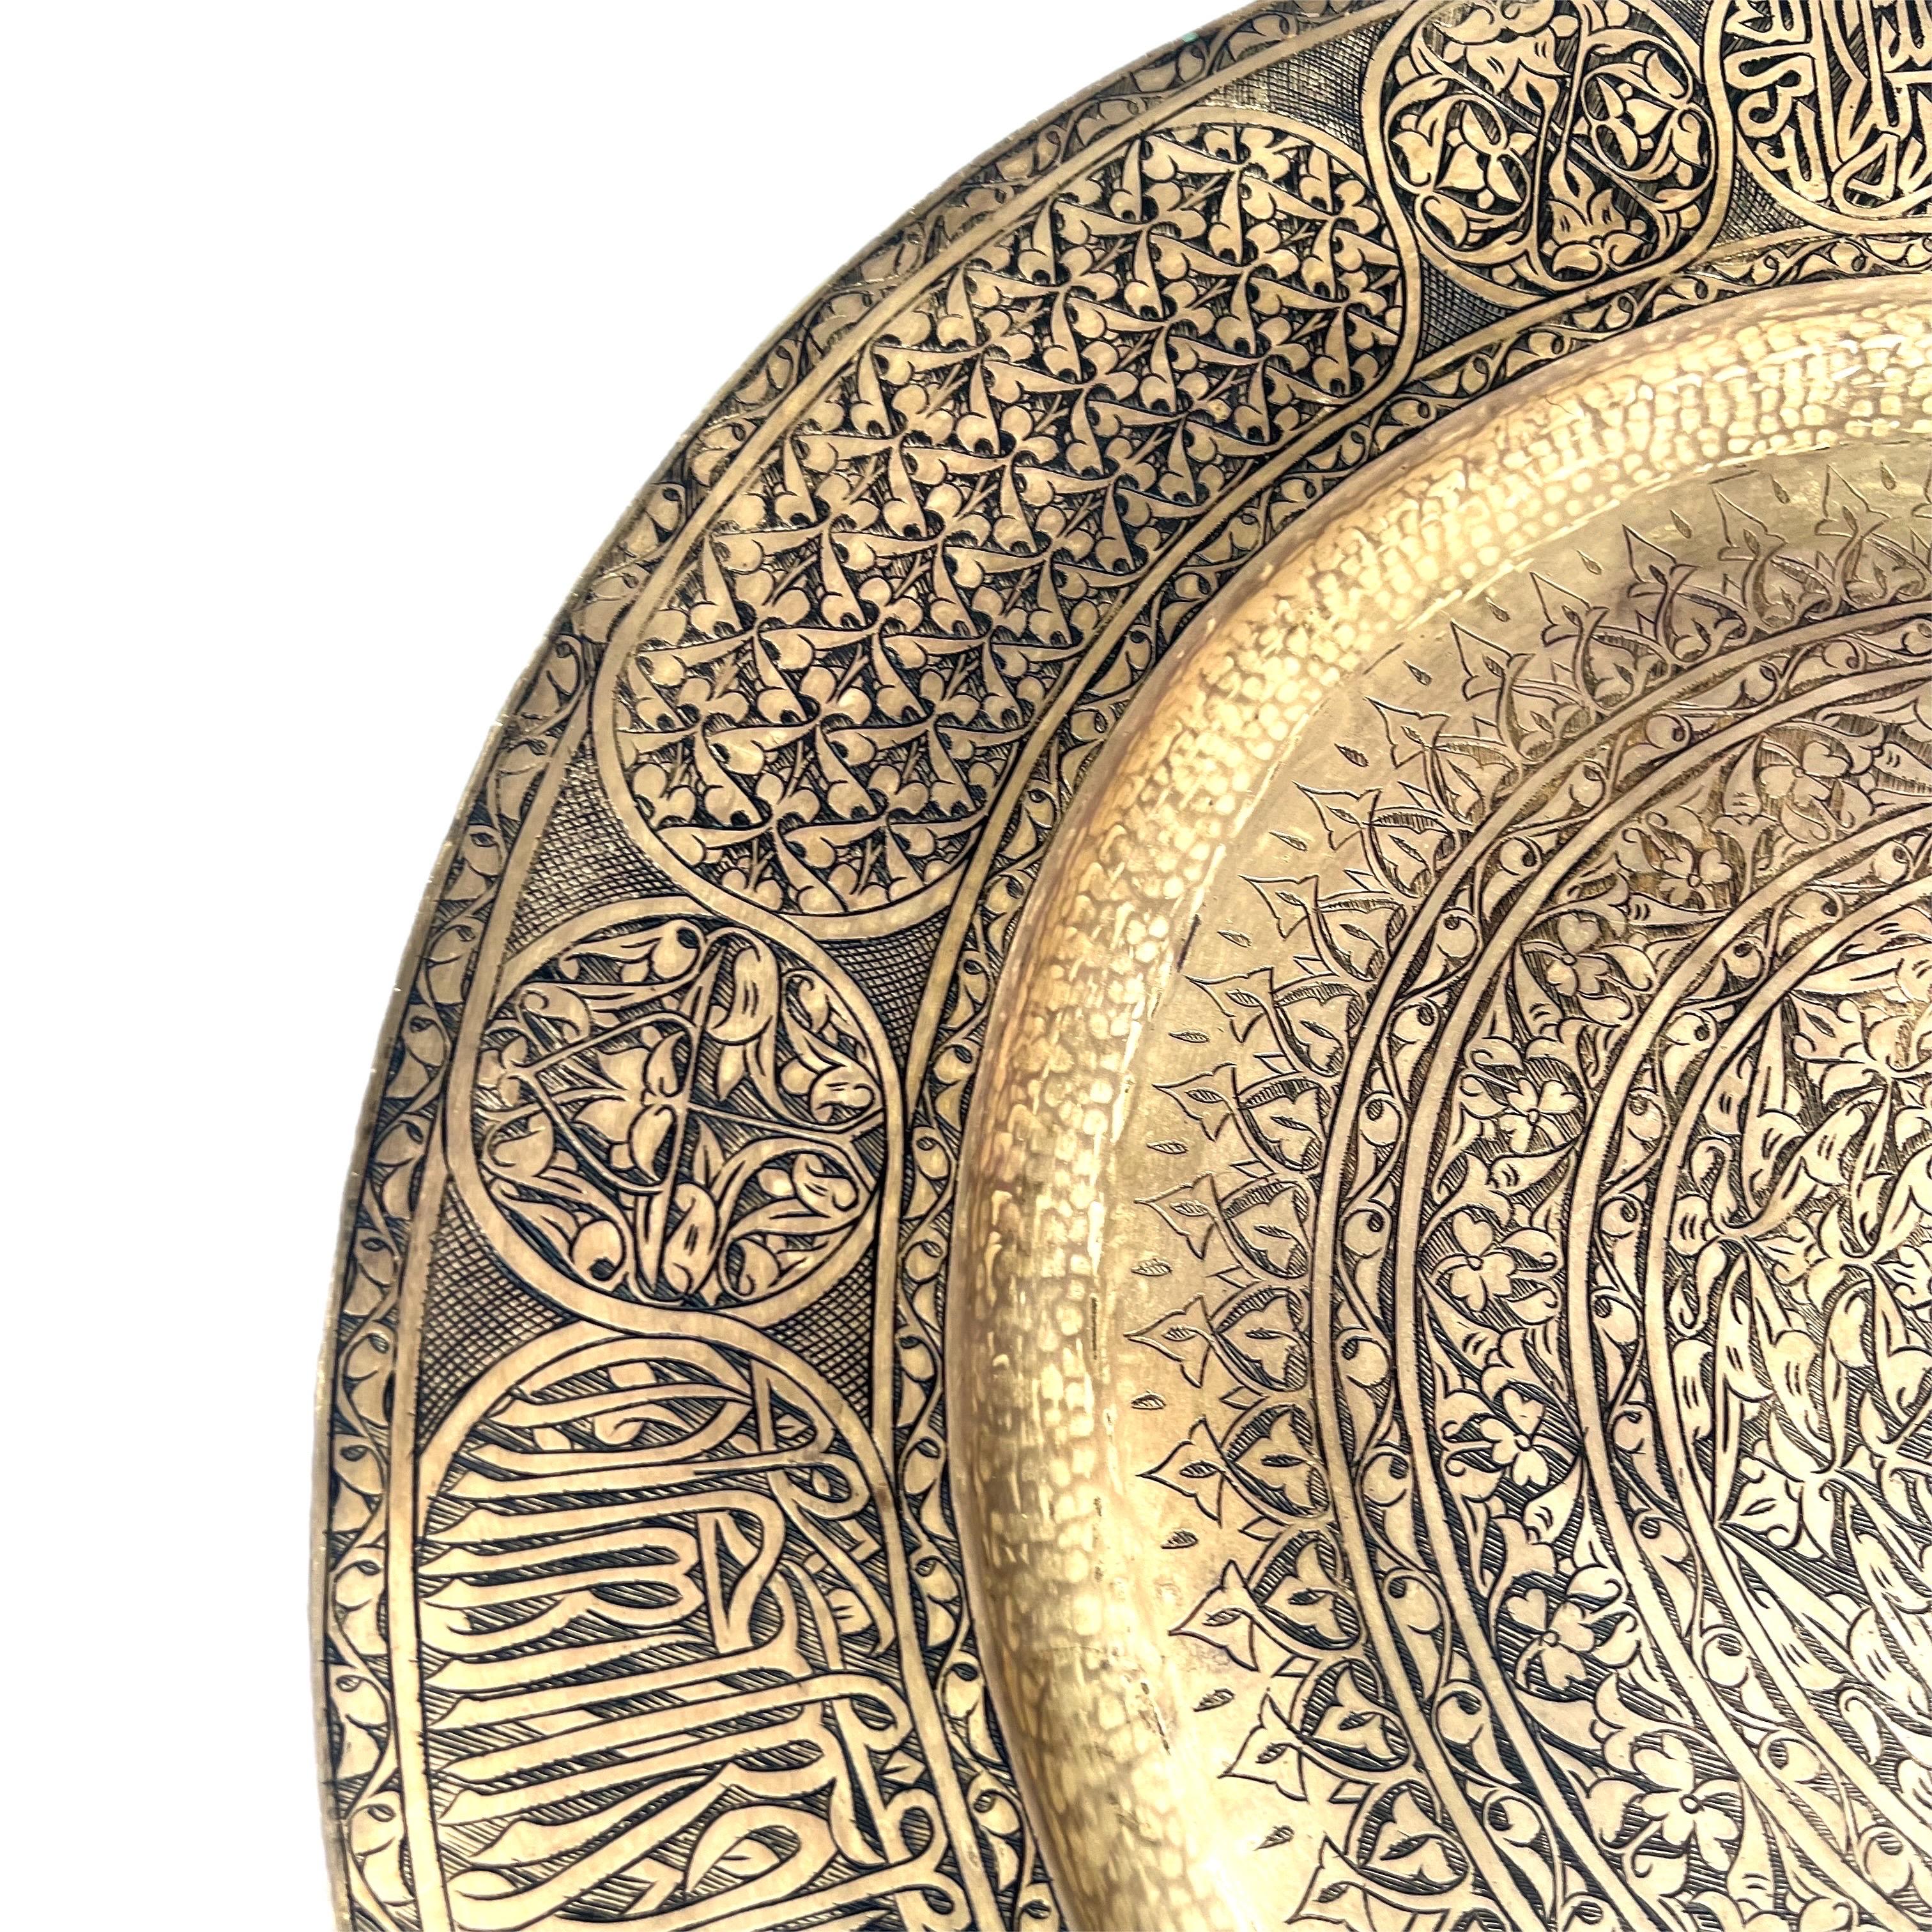 Large 25” decorative Moorish brass tray, serving platter. Middle Eastern hand-made and hand hammered in Syria by skilled artisans. This nice brass tray is hand hammered with elaborate and fine Islamic geometric designs, with a star in the middle.